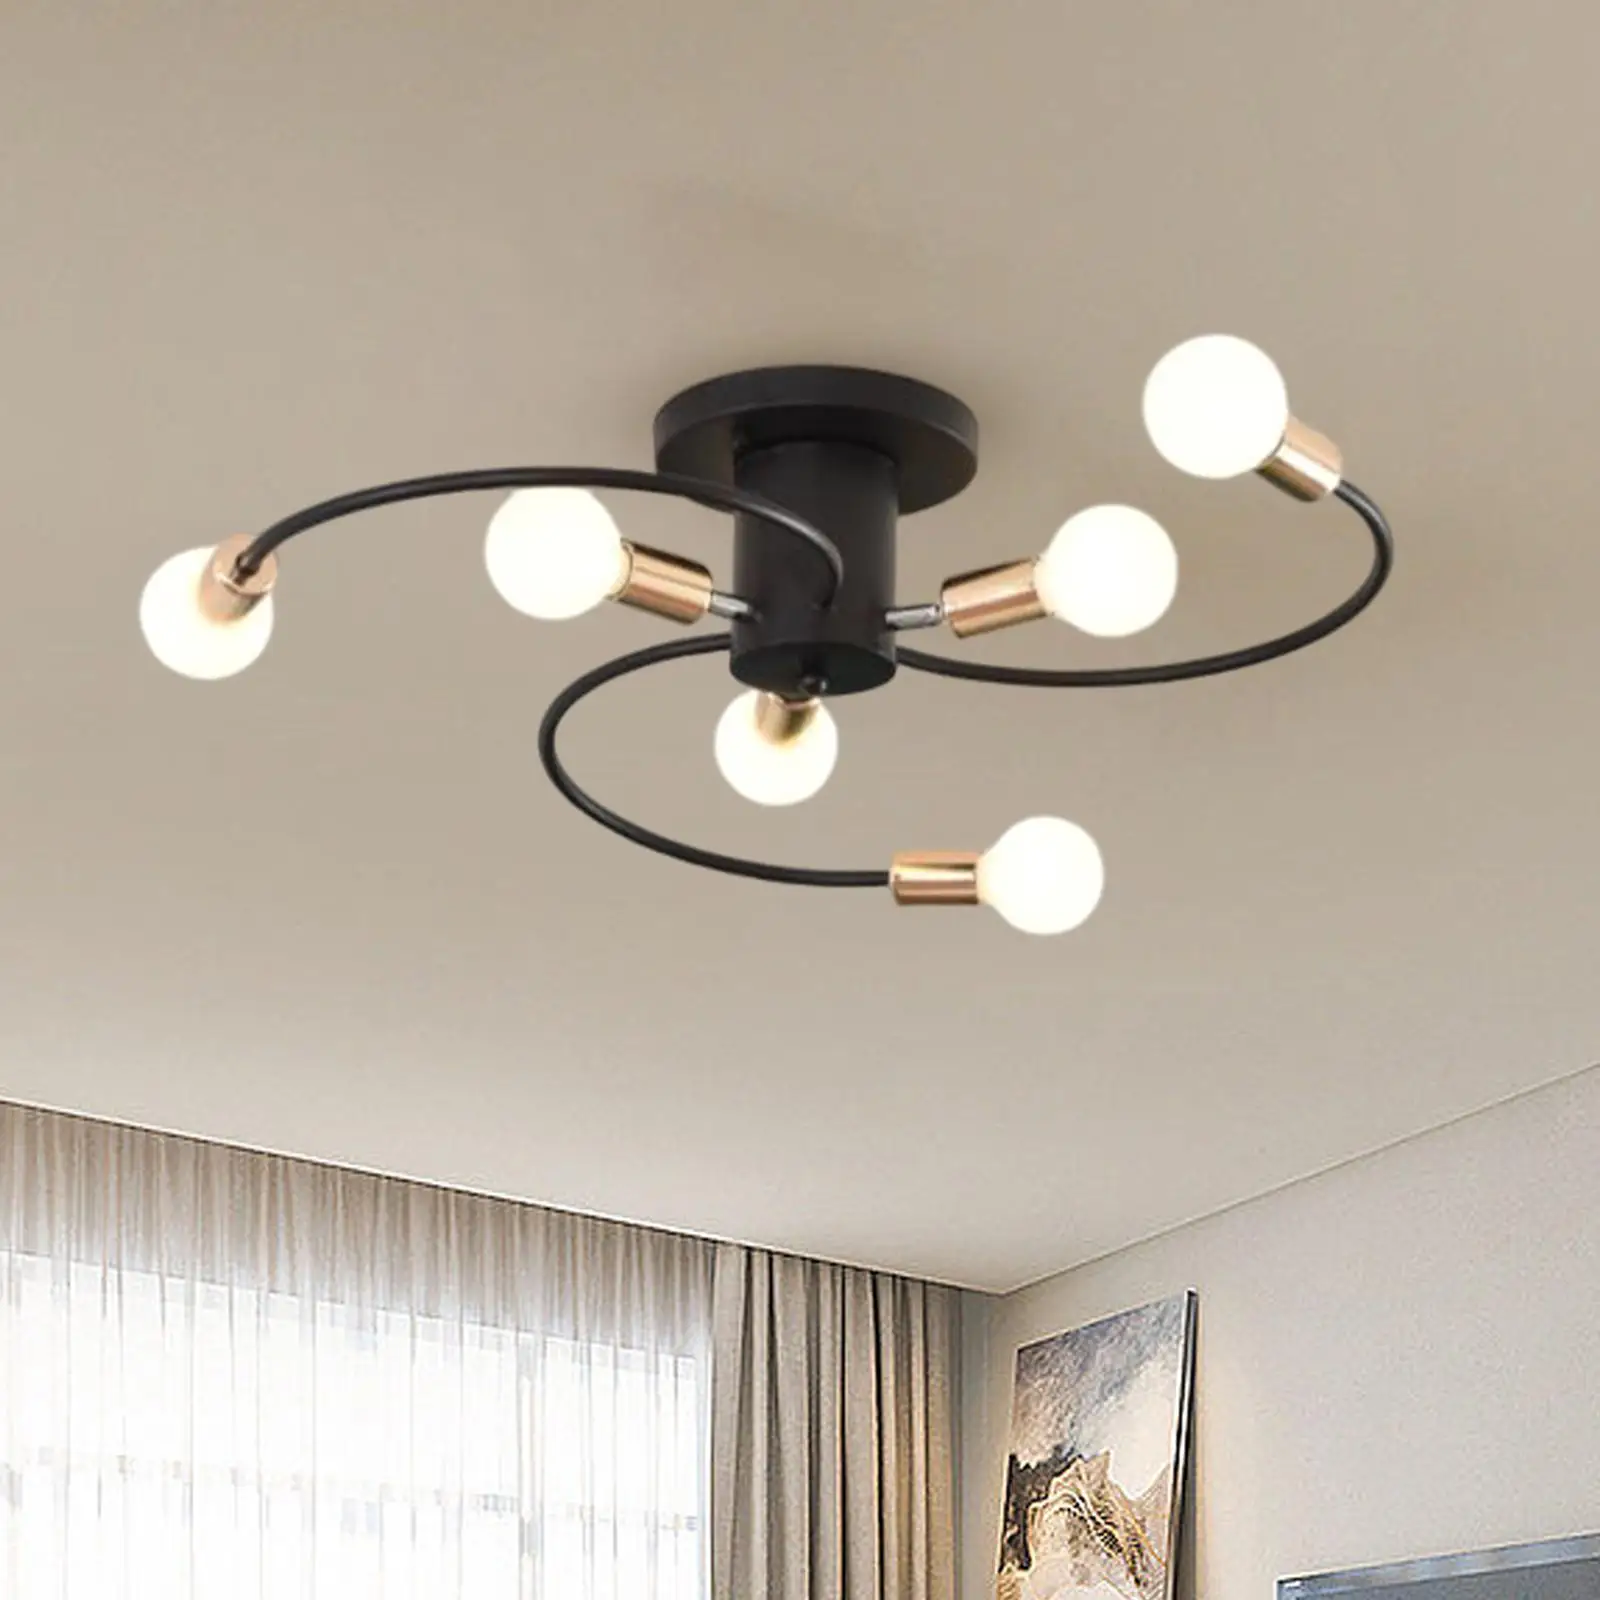 Ceiling Light Chandelier Lighting Fixture Close to Ceiling Light Dining Room LED Pendant Light for Kitchen Closet Home Stairwell